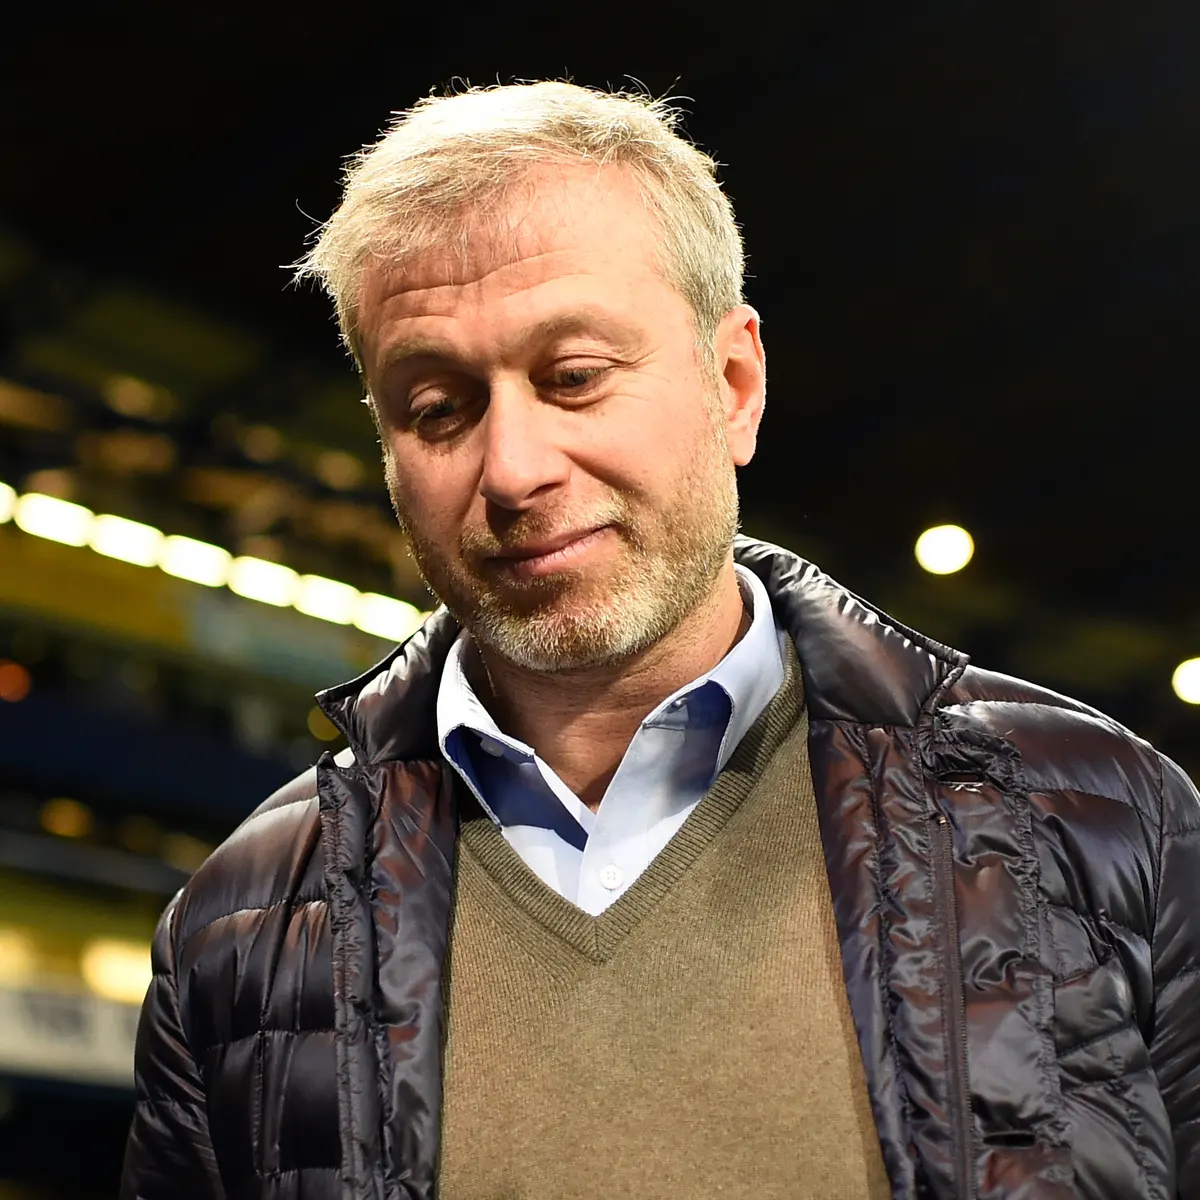 Roman Abramovich reportedly begging his friends to lend him $1M to pay staff? 56